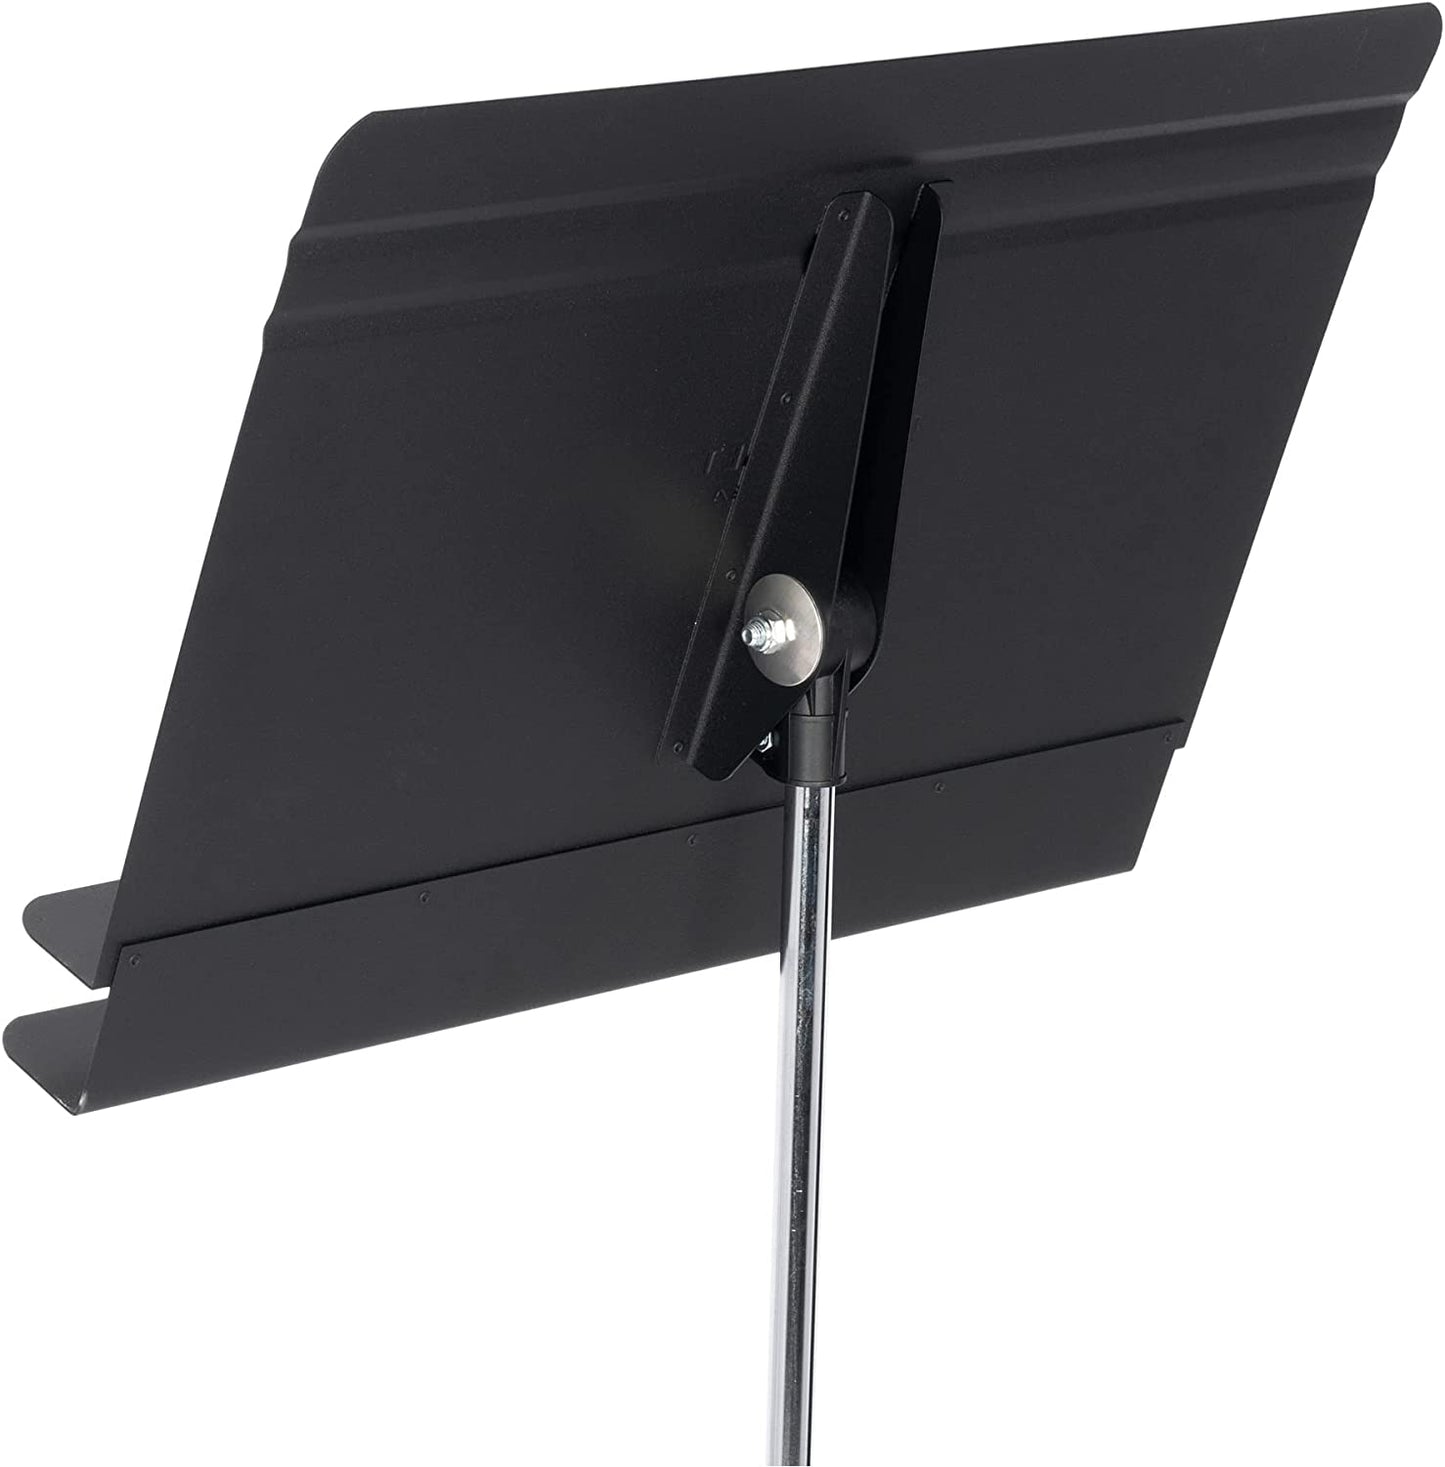 Manhasset Tall Orchestral Stand - Black Musical Instruments & Accessories